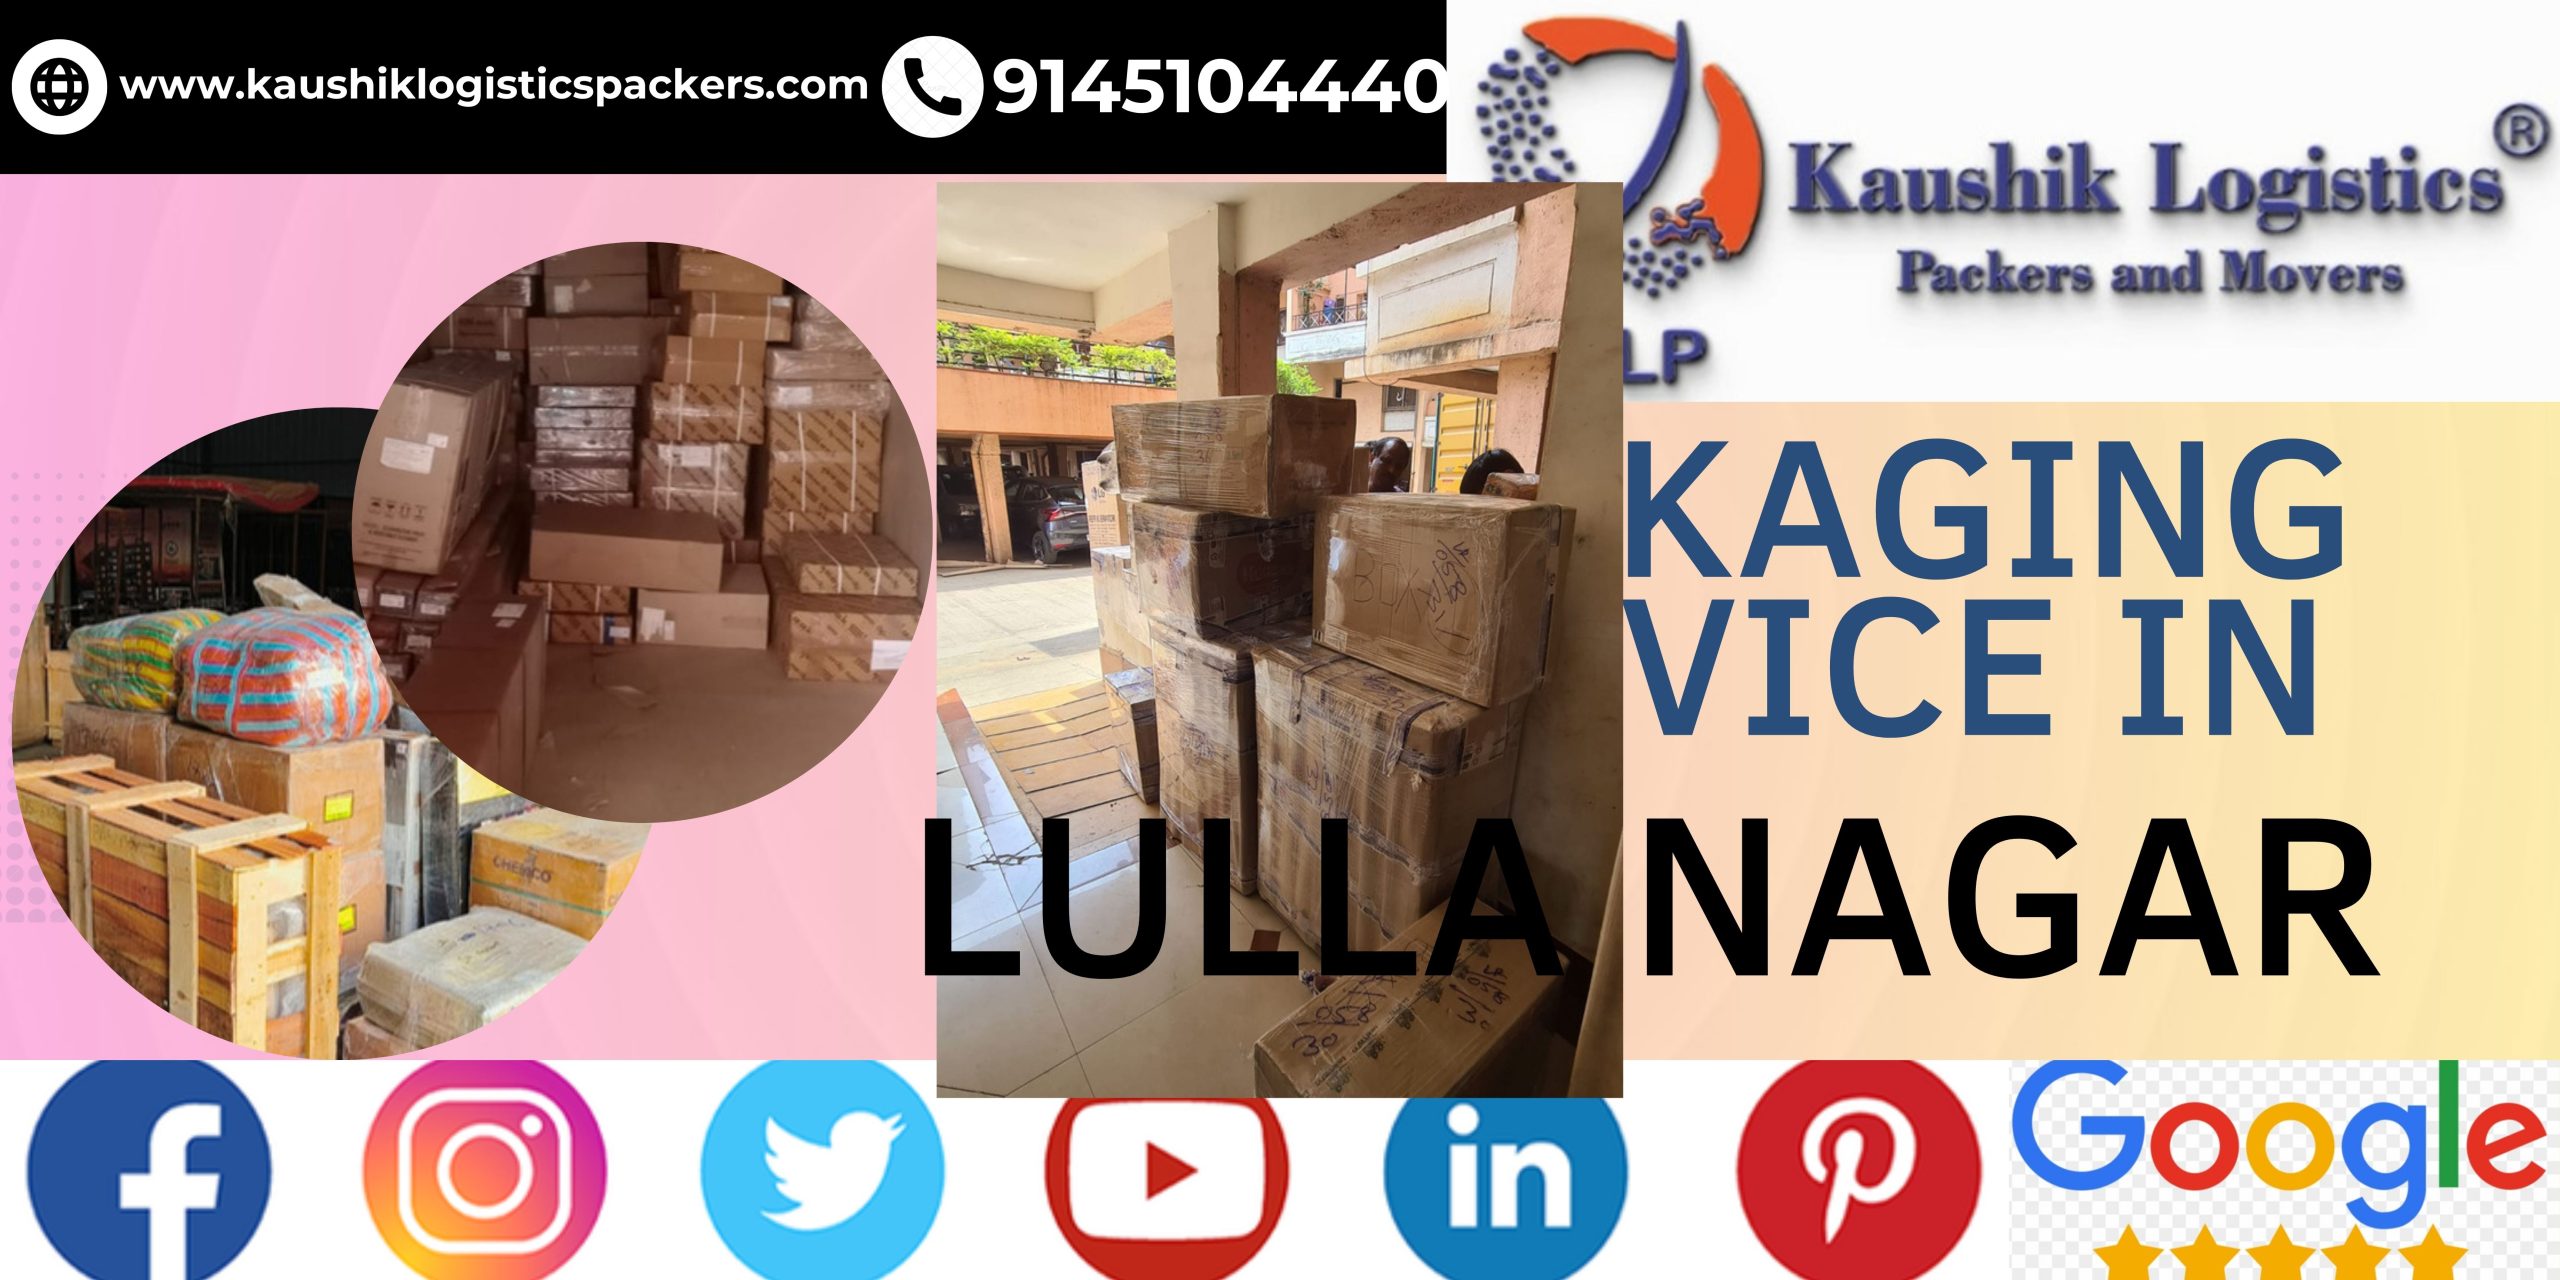 Packers and Movers In Lulla Nagar